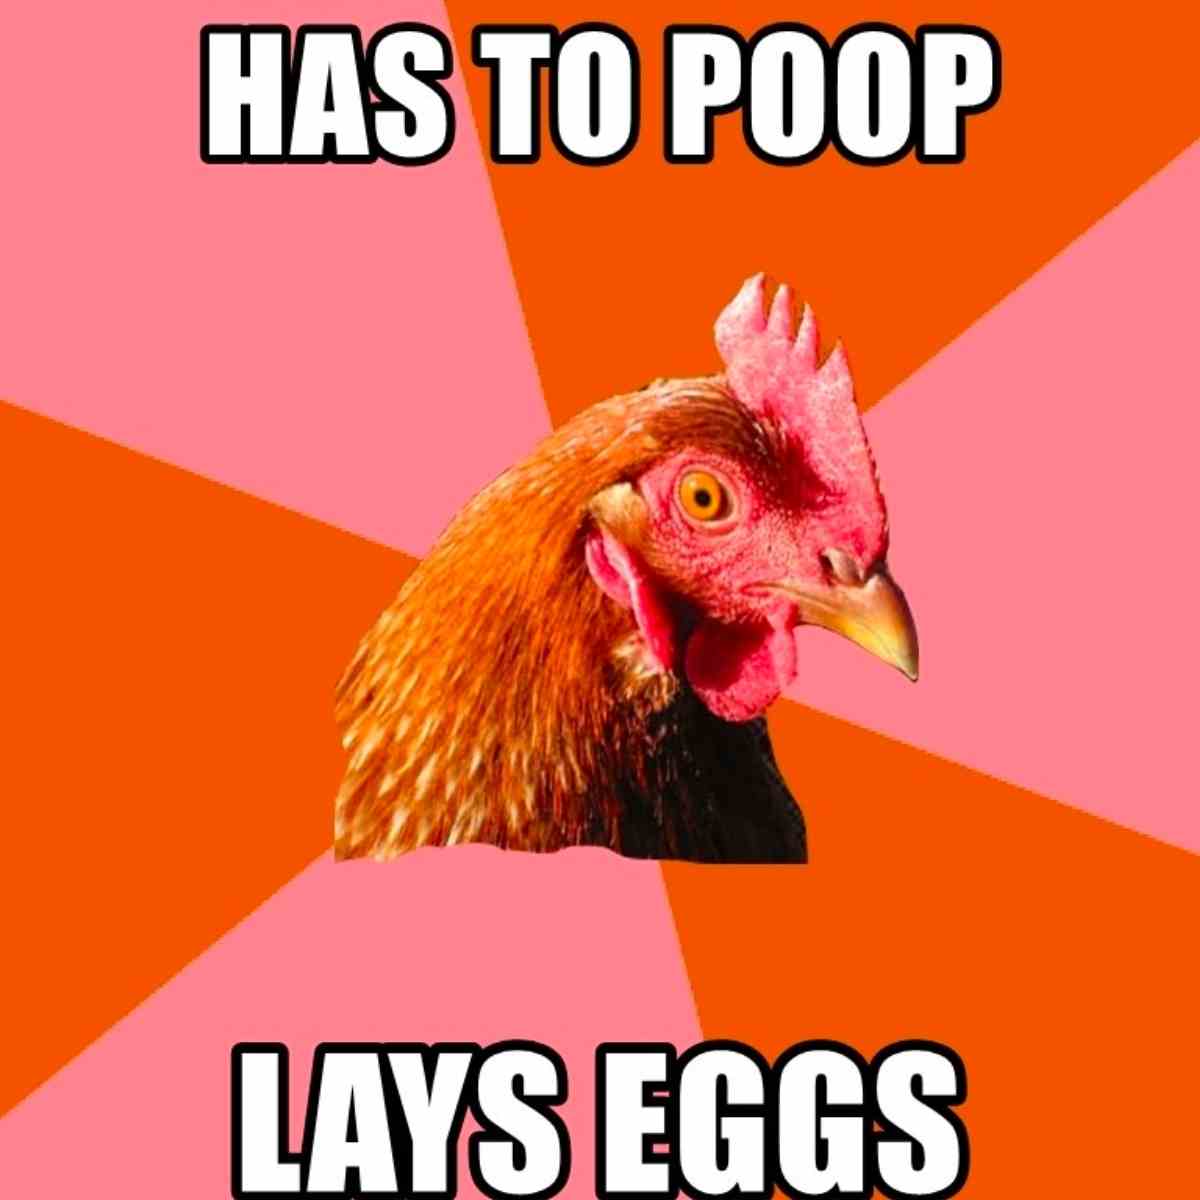 laying eggs meme chicken has to poop lays eggs